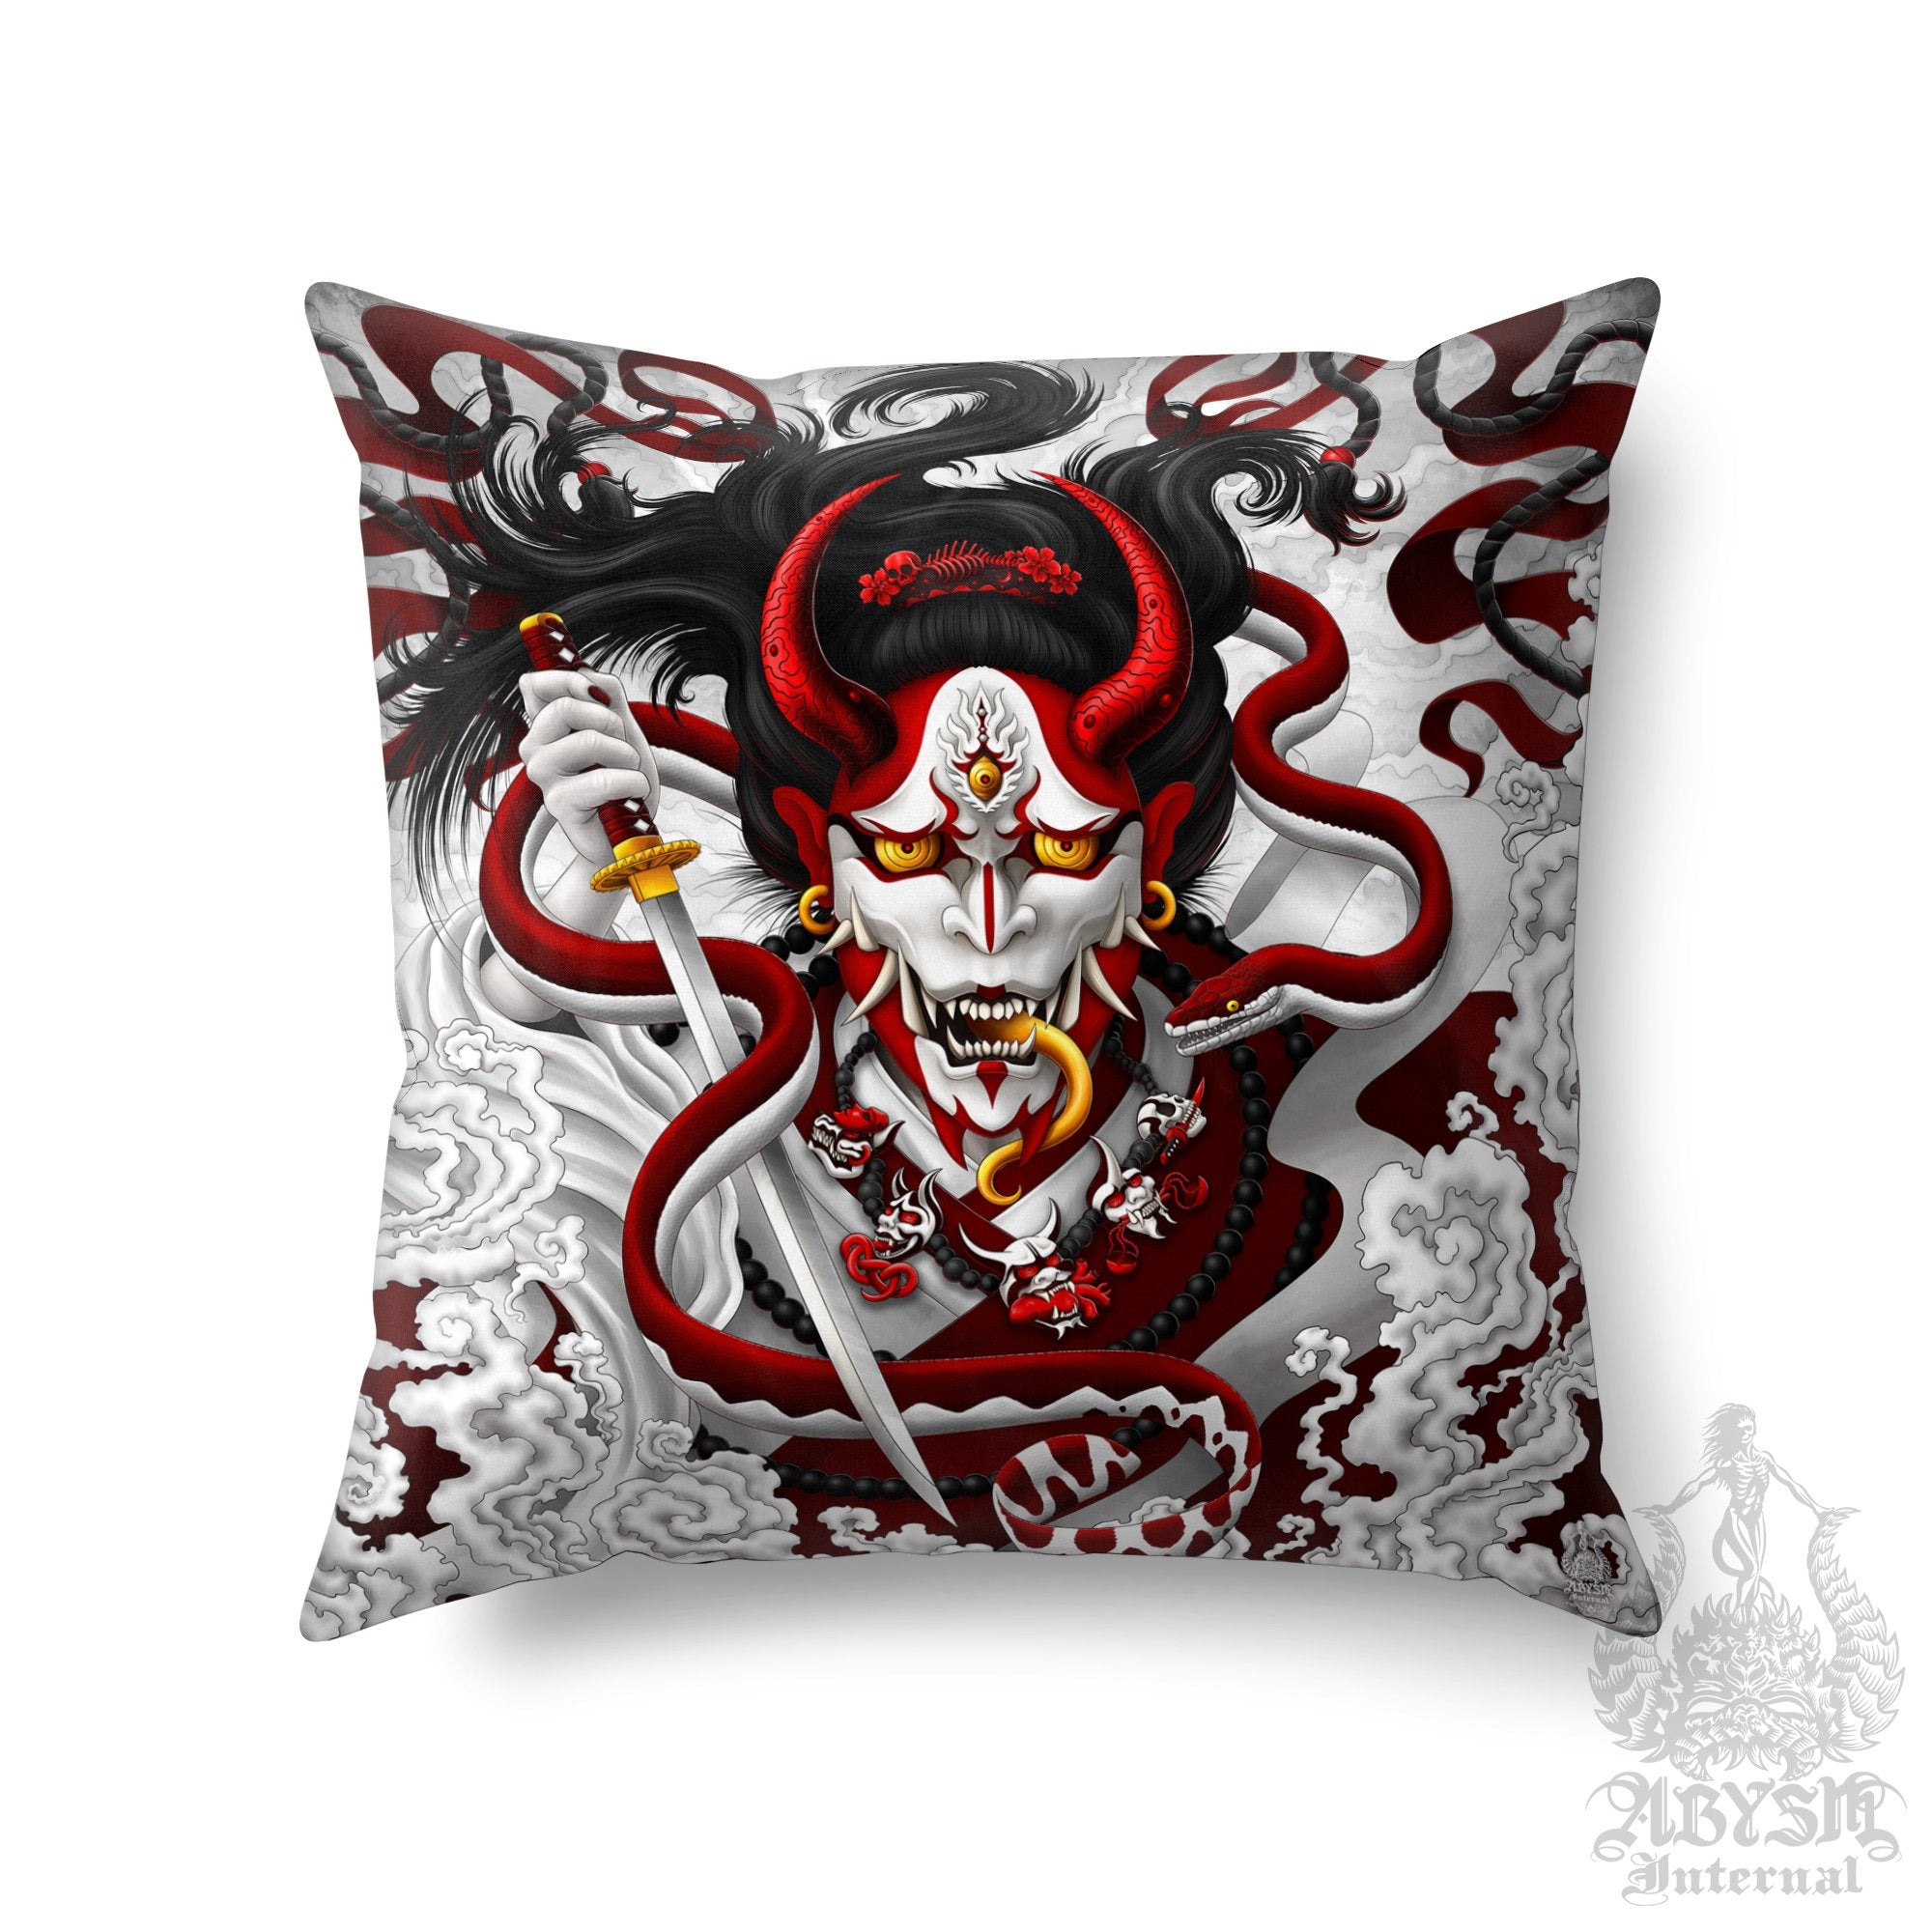 White Goth Hannya Throw Pillow, Decorative Accent Pillow, Square Cushion Cover, Japanese Demon & Red Snake, Anime Room Decor - Abysm Internal